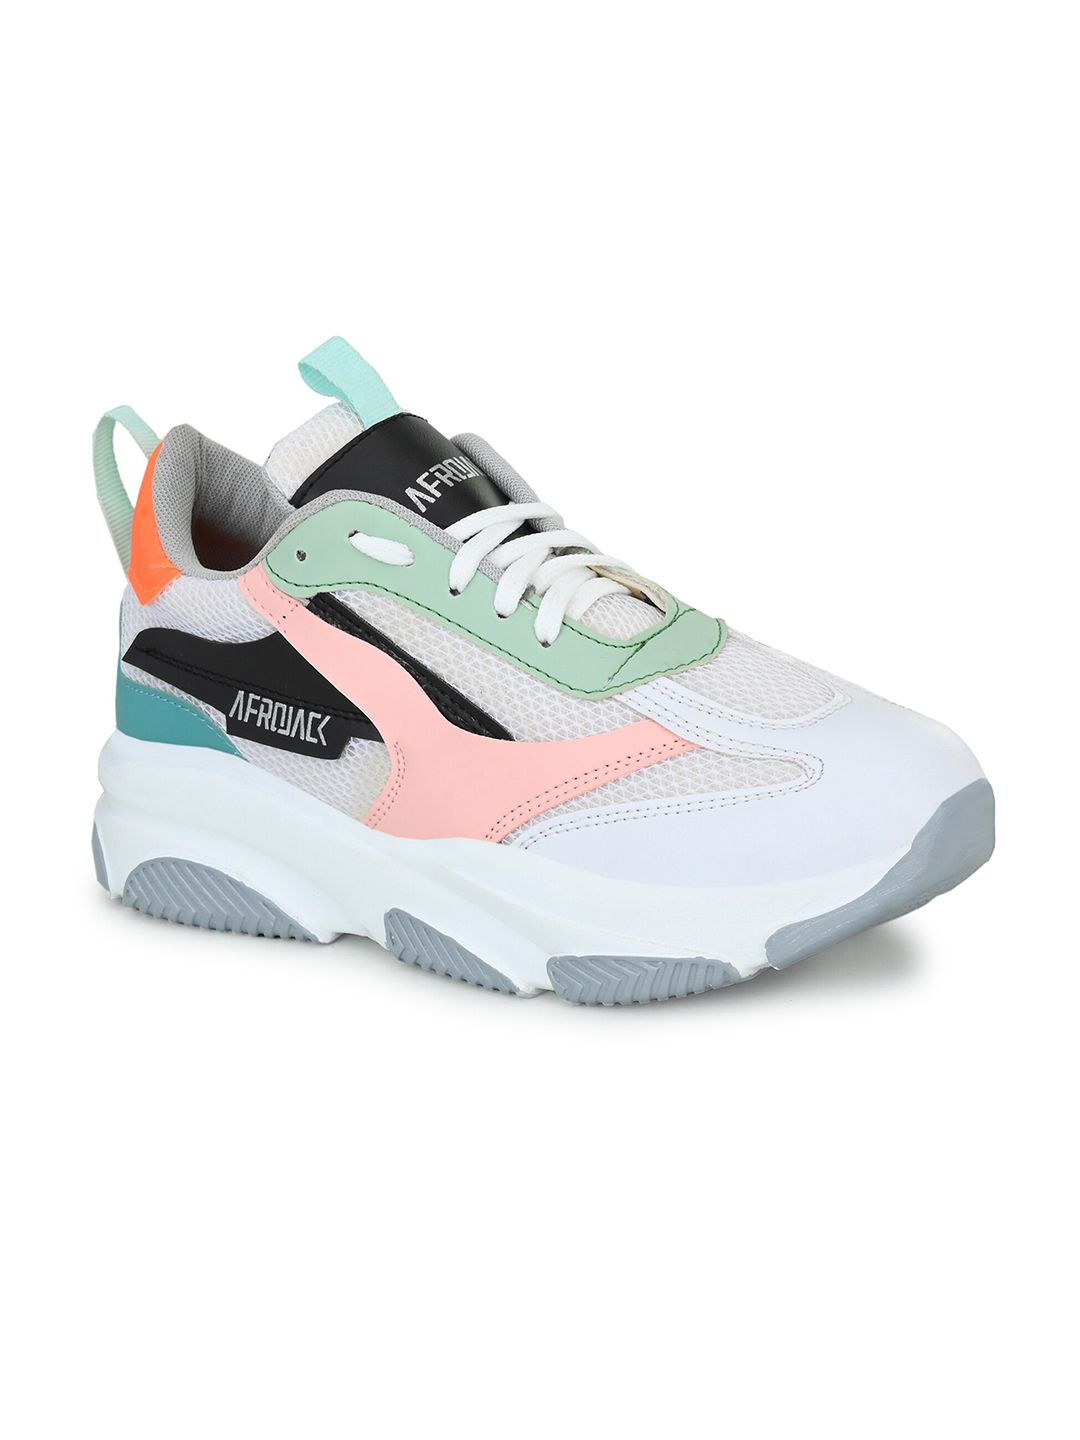 AfroJack Women Pink Colourblocked Sneakers Price in India